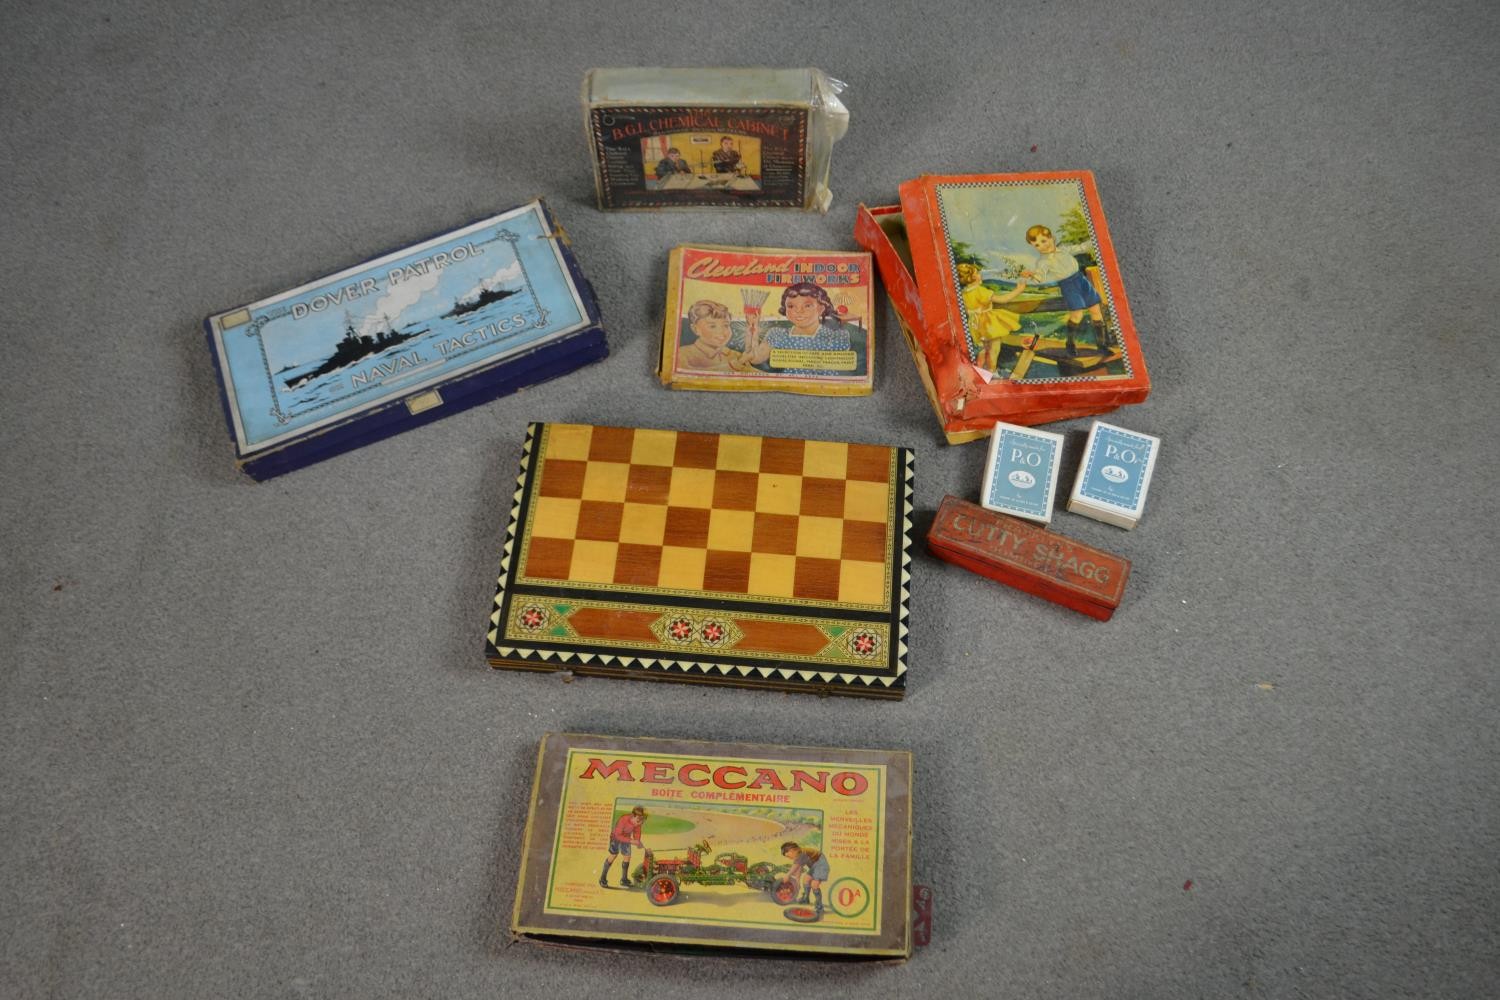 A collection of vintage games and activity sets, including a Meccano set, Dover Patrol, B.G.L.